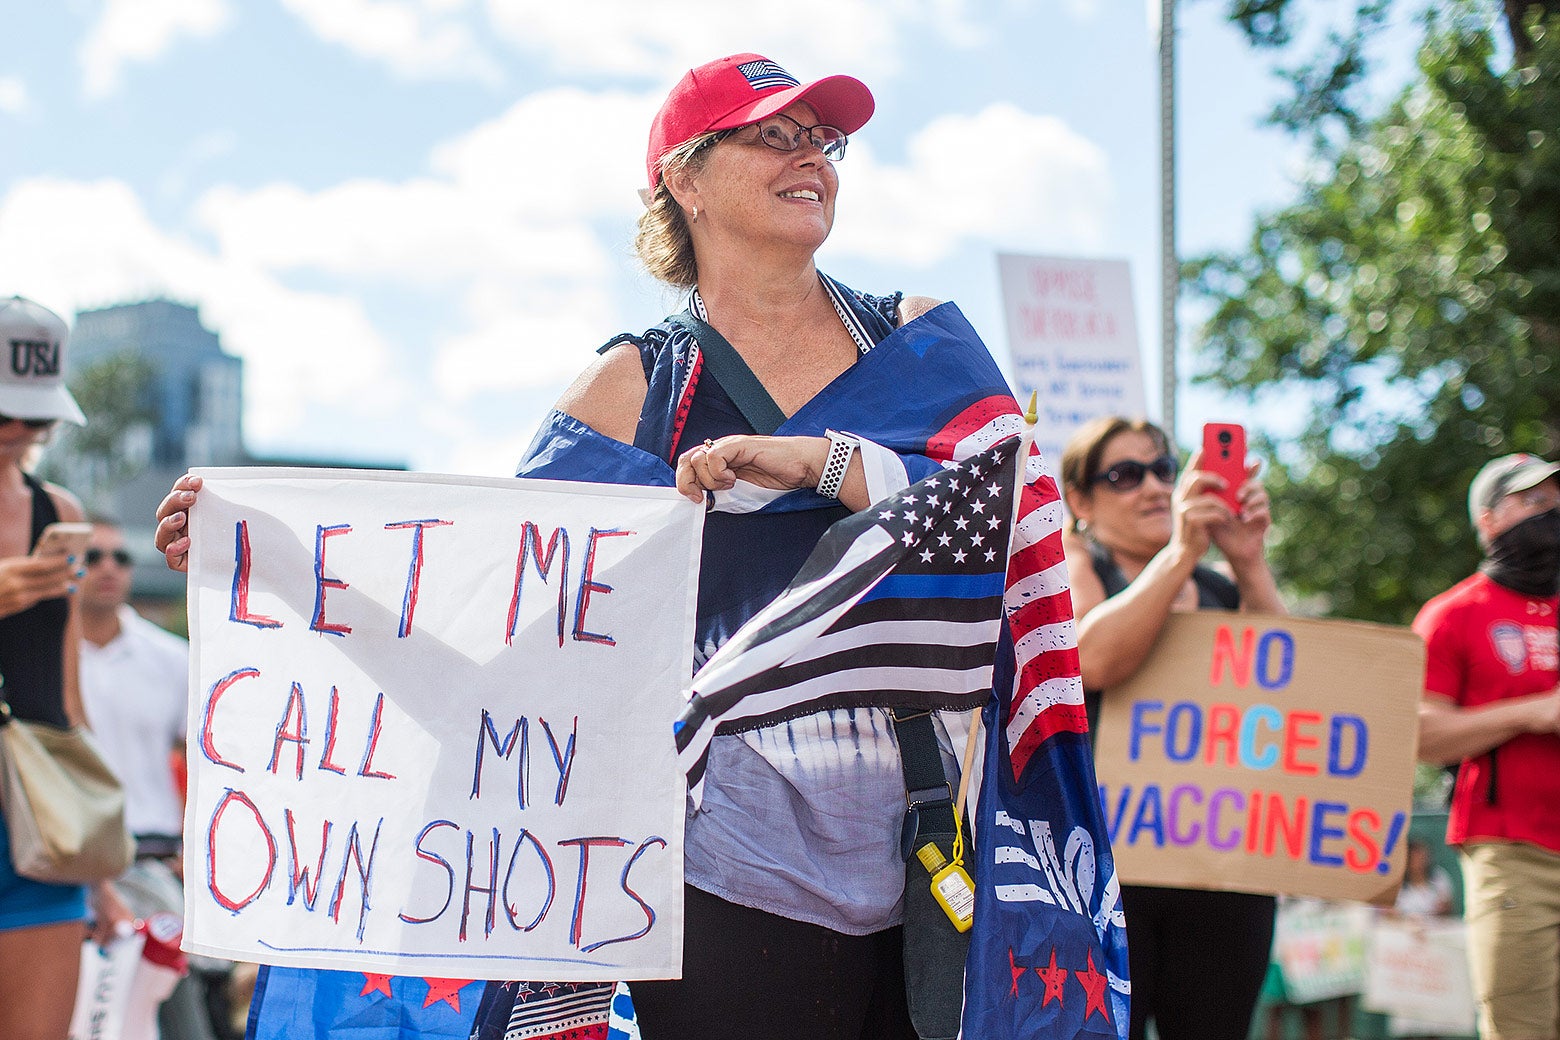 A woman holds up a sign that says, "LET ME CALL MY OWN SHOTS."